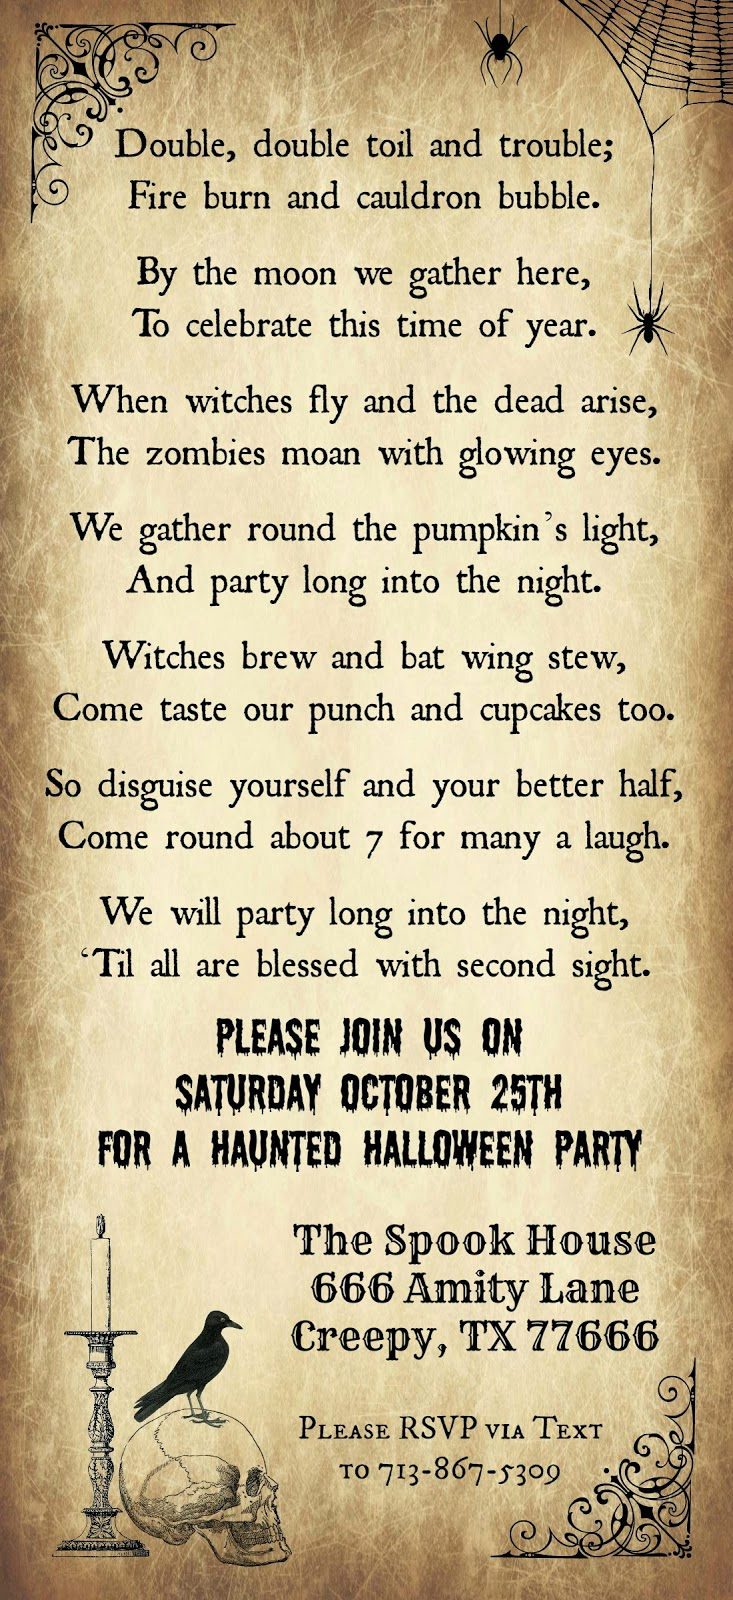 Halloween Party Invitations Template Awesome Crafty In Crosby Halloween Party Invitation 2014